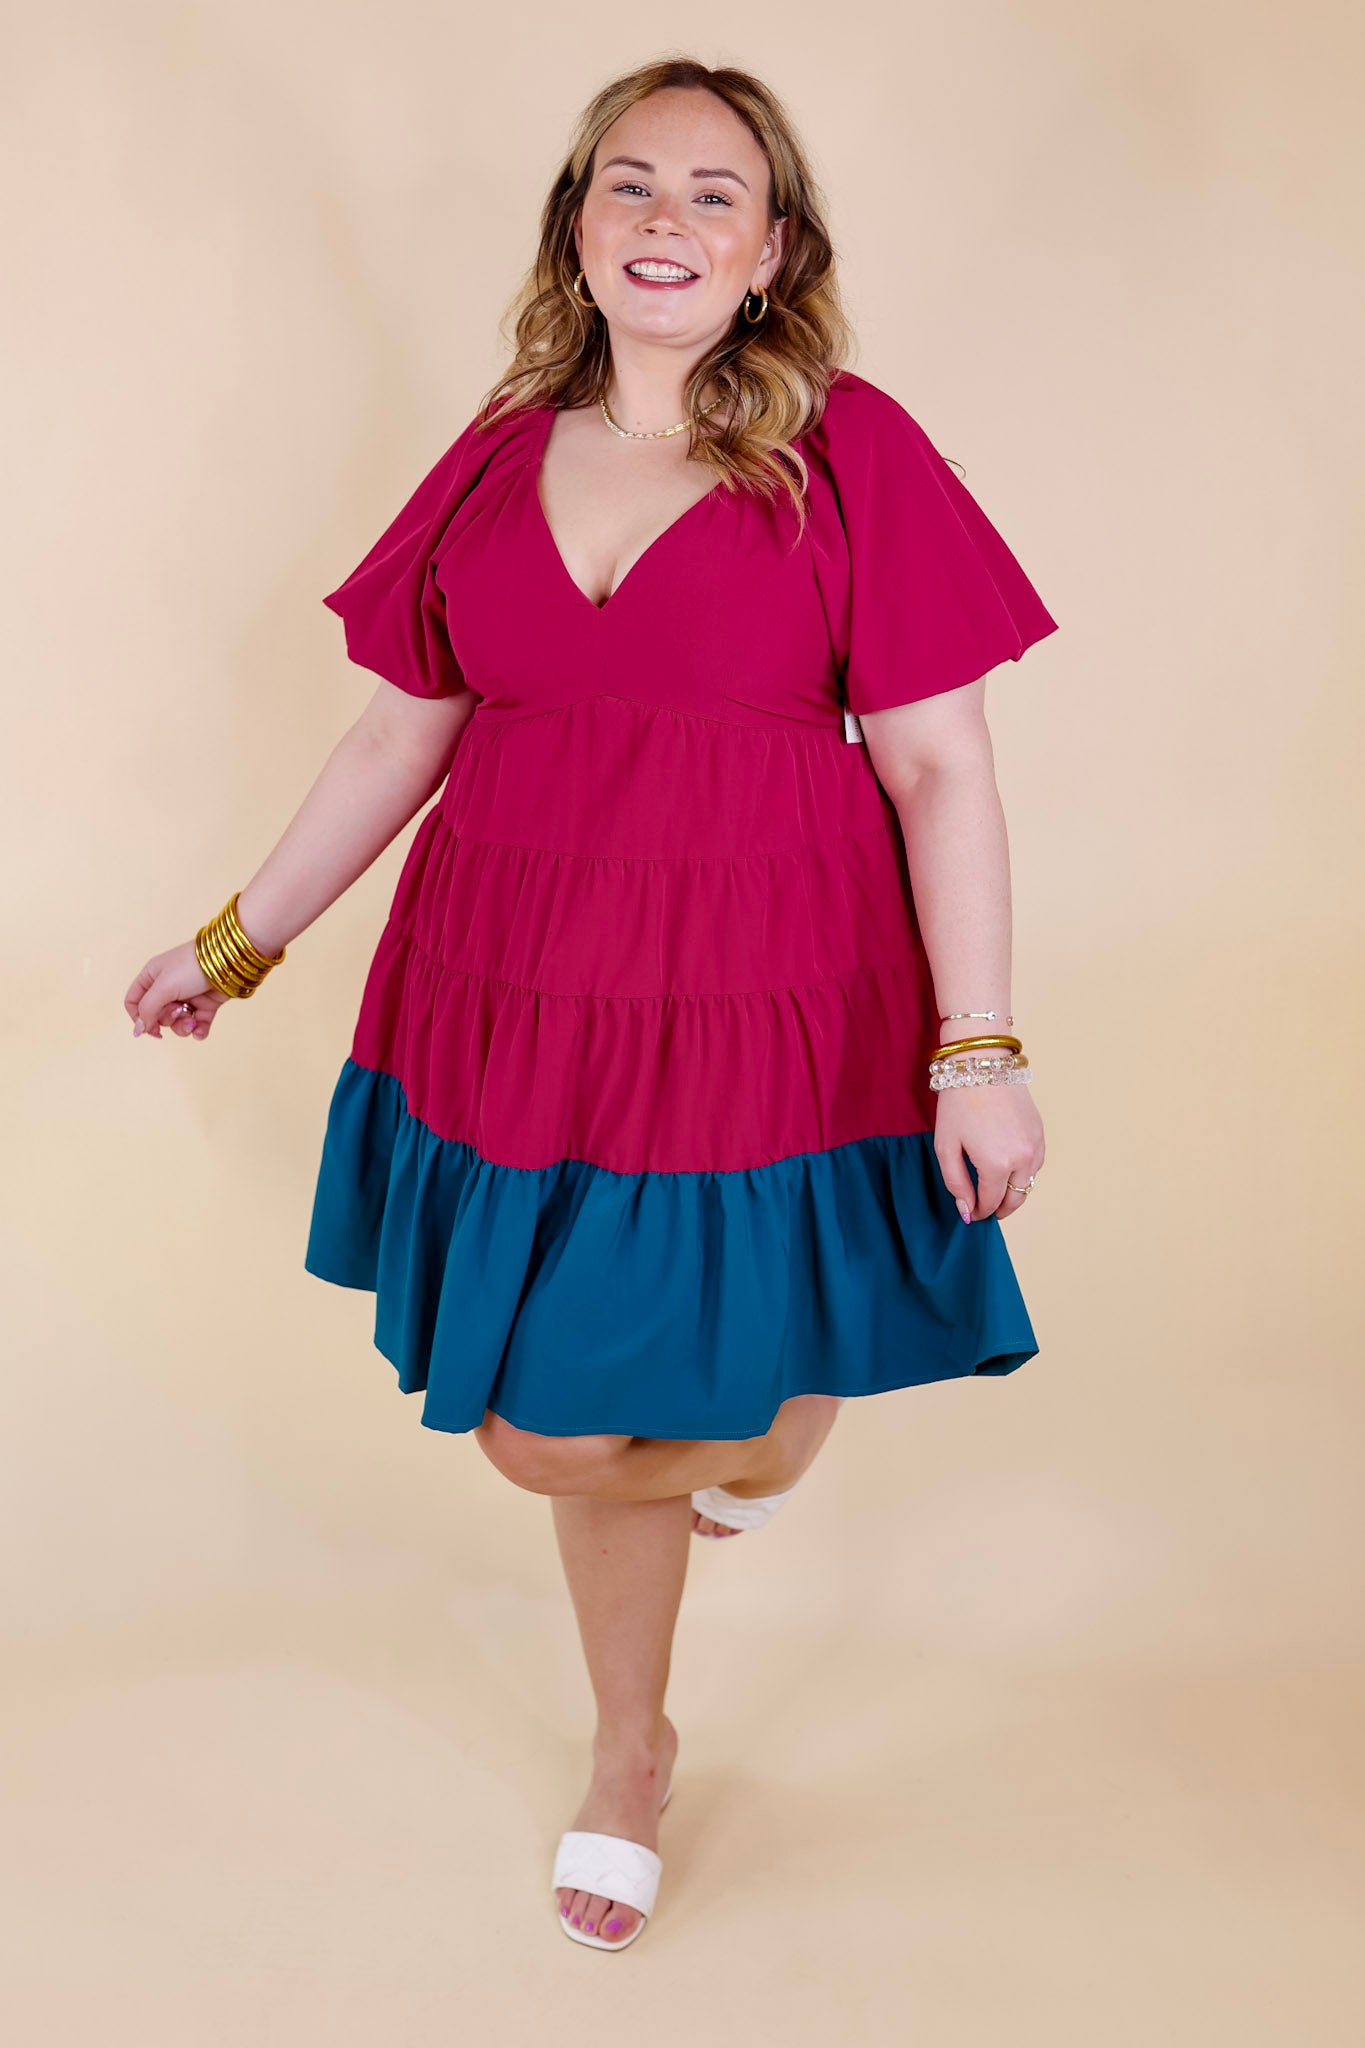 Trendy City Puff Sleeve Tiered Dress with Teal Hemline in Magenta - Giddy Up Glamour Boutique